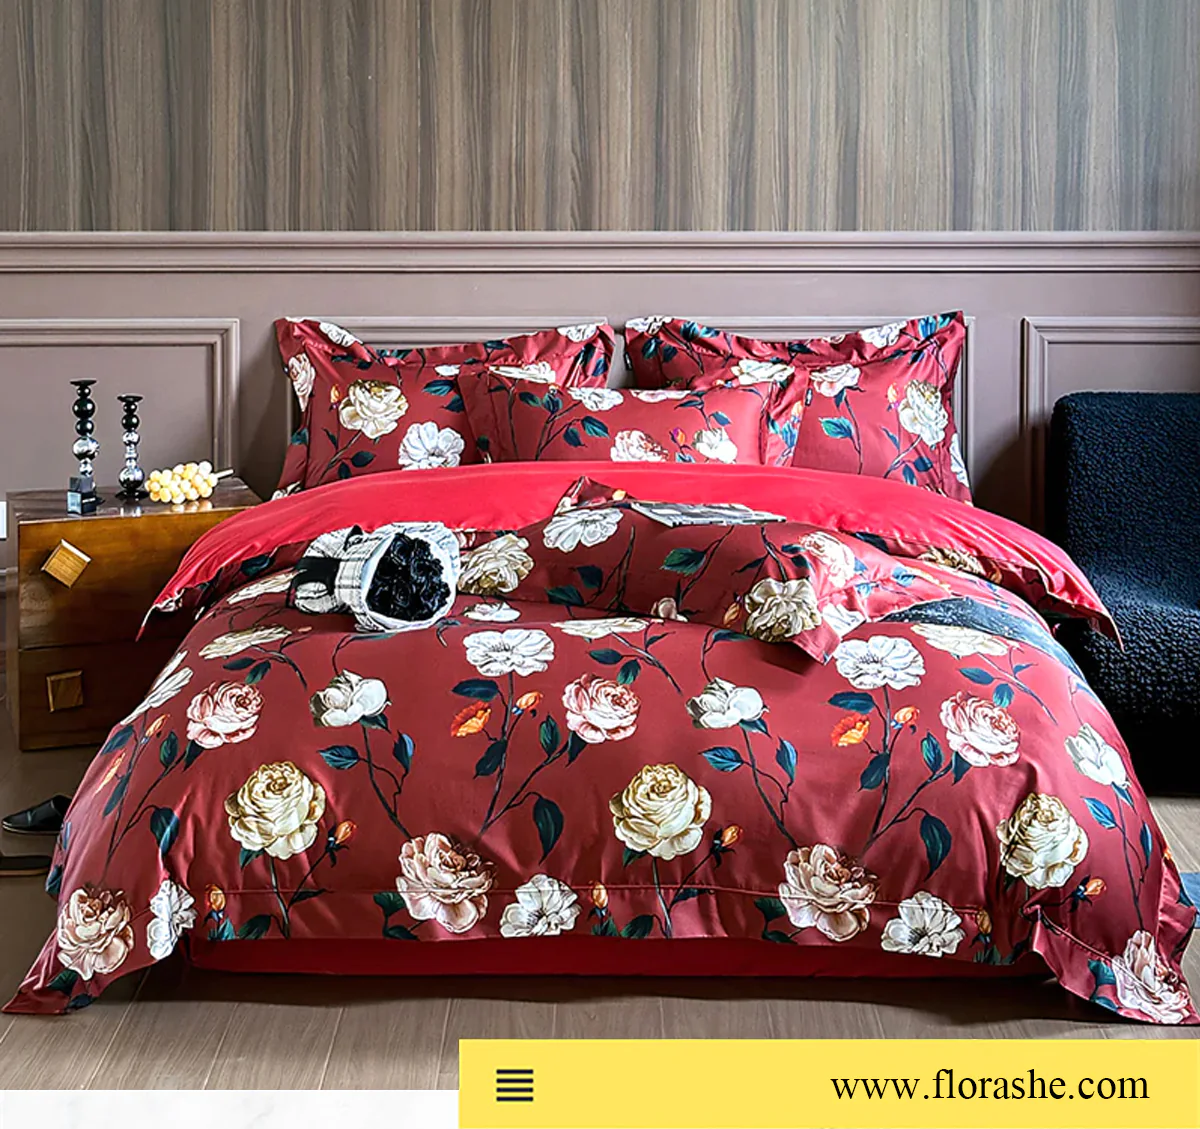 Aesthetic-100S-AB-Side-Floral-Print-Egyptian-Cotton-Bedding-Set15